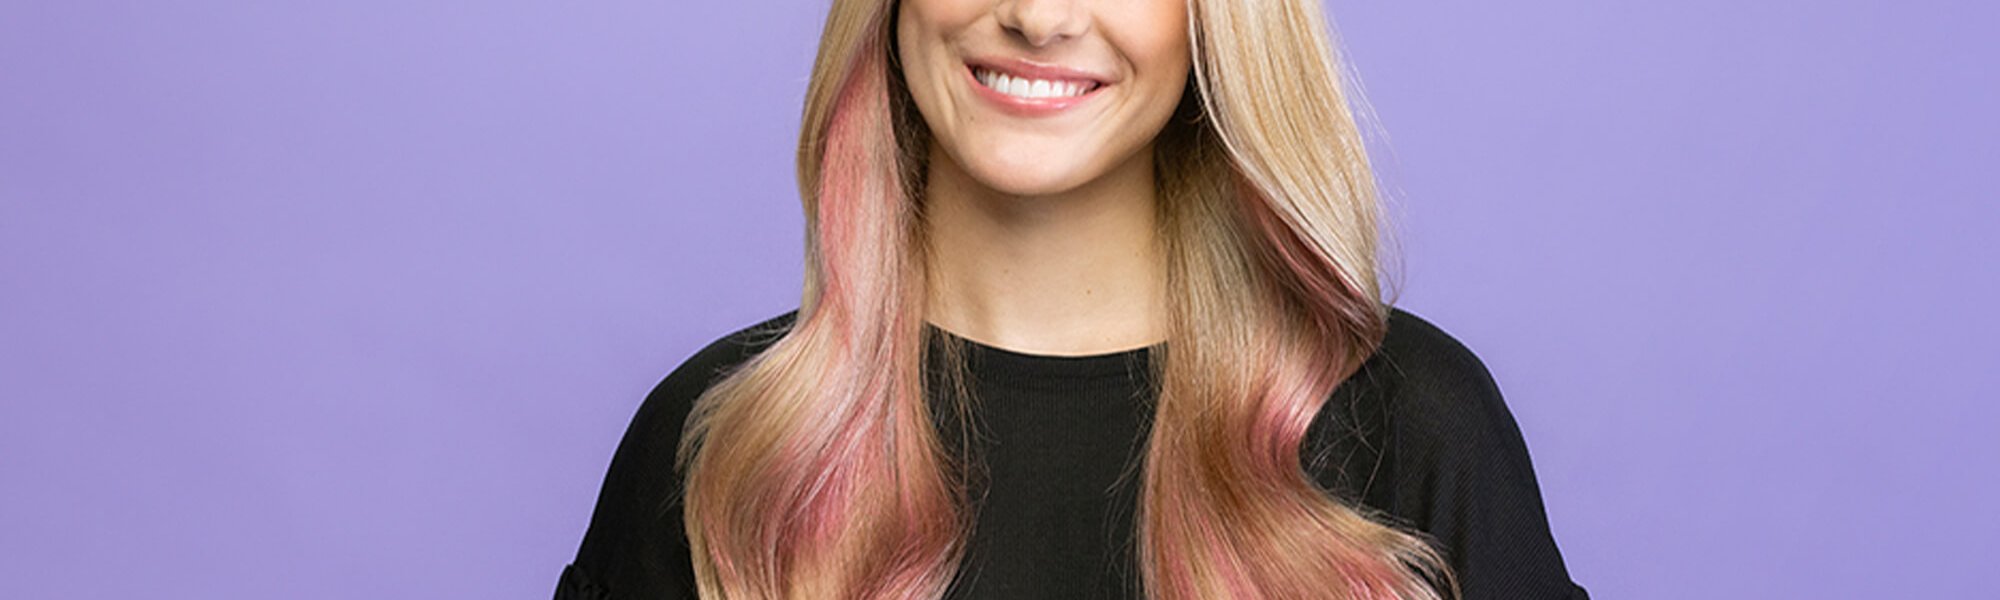 Trending Now How To Add Subtle Pink To Blonde Hair